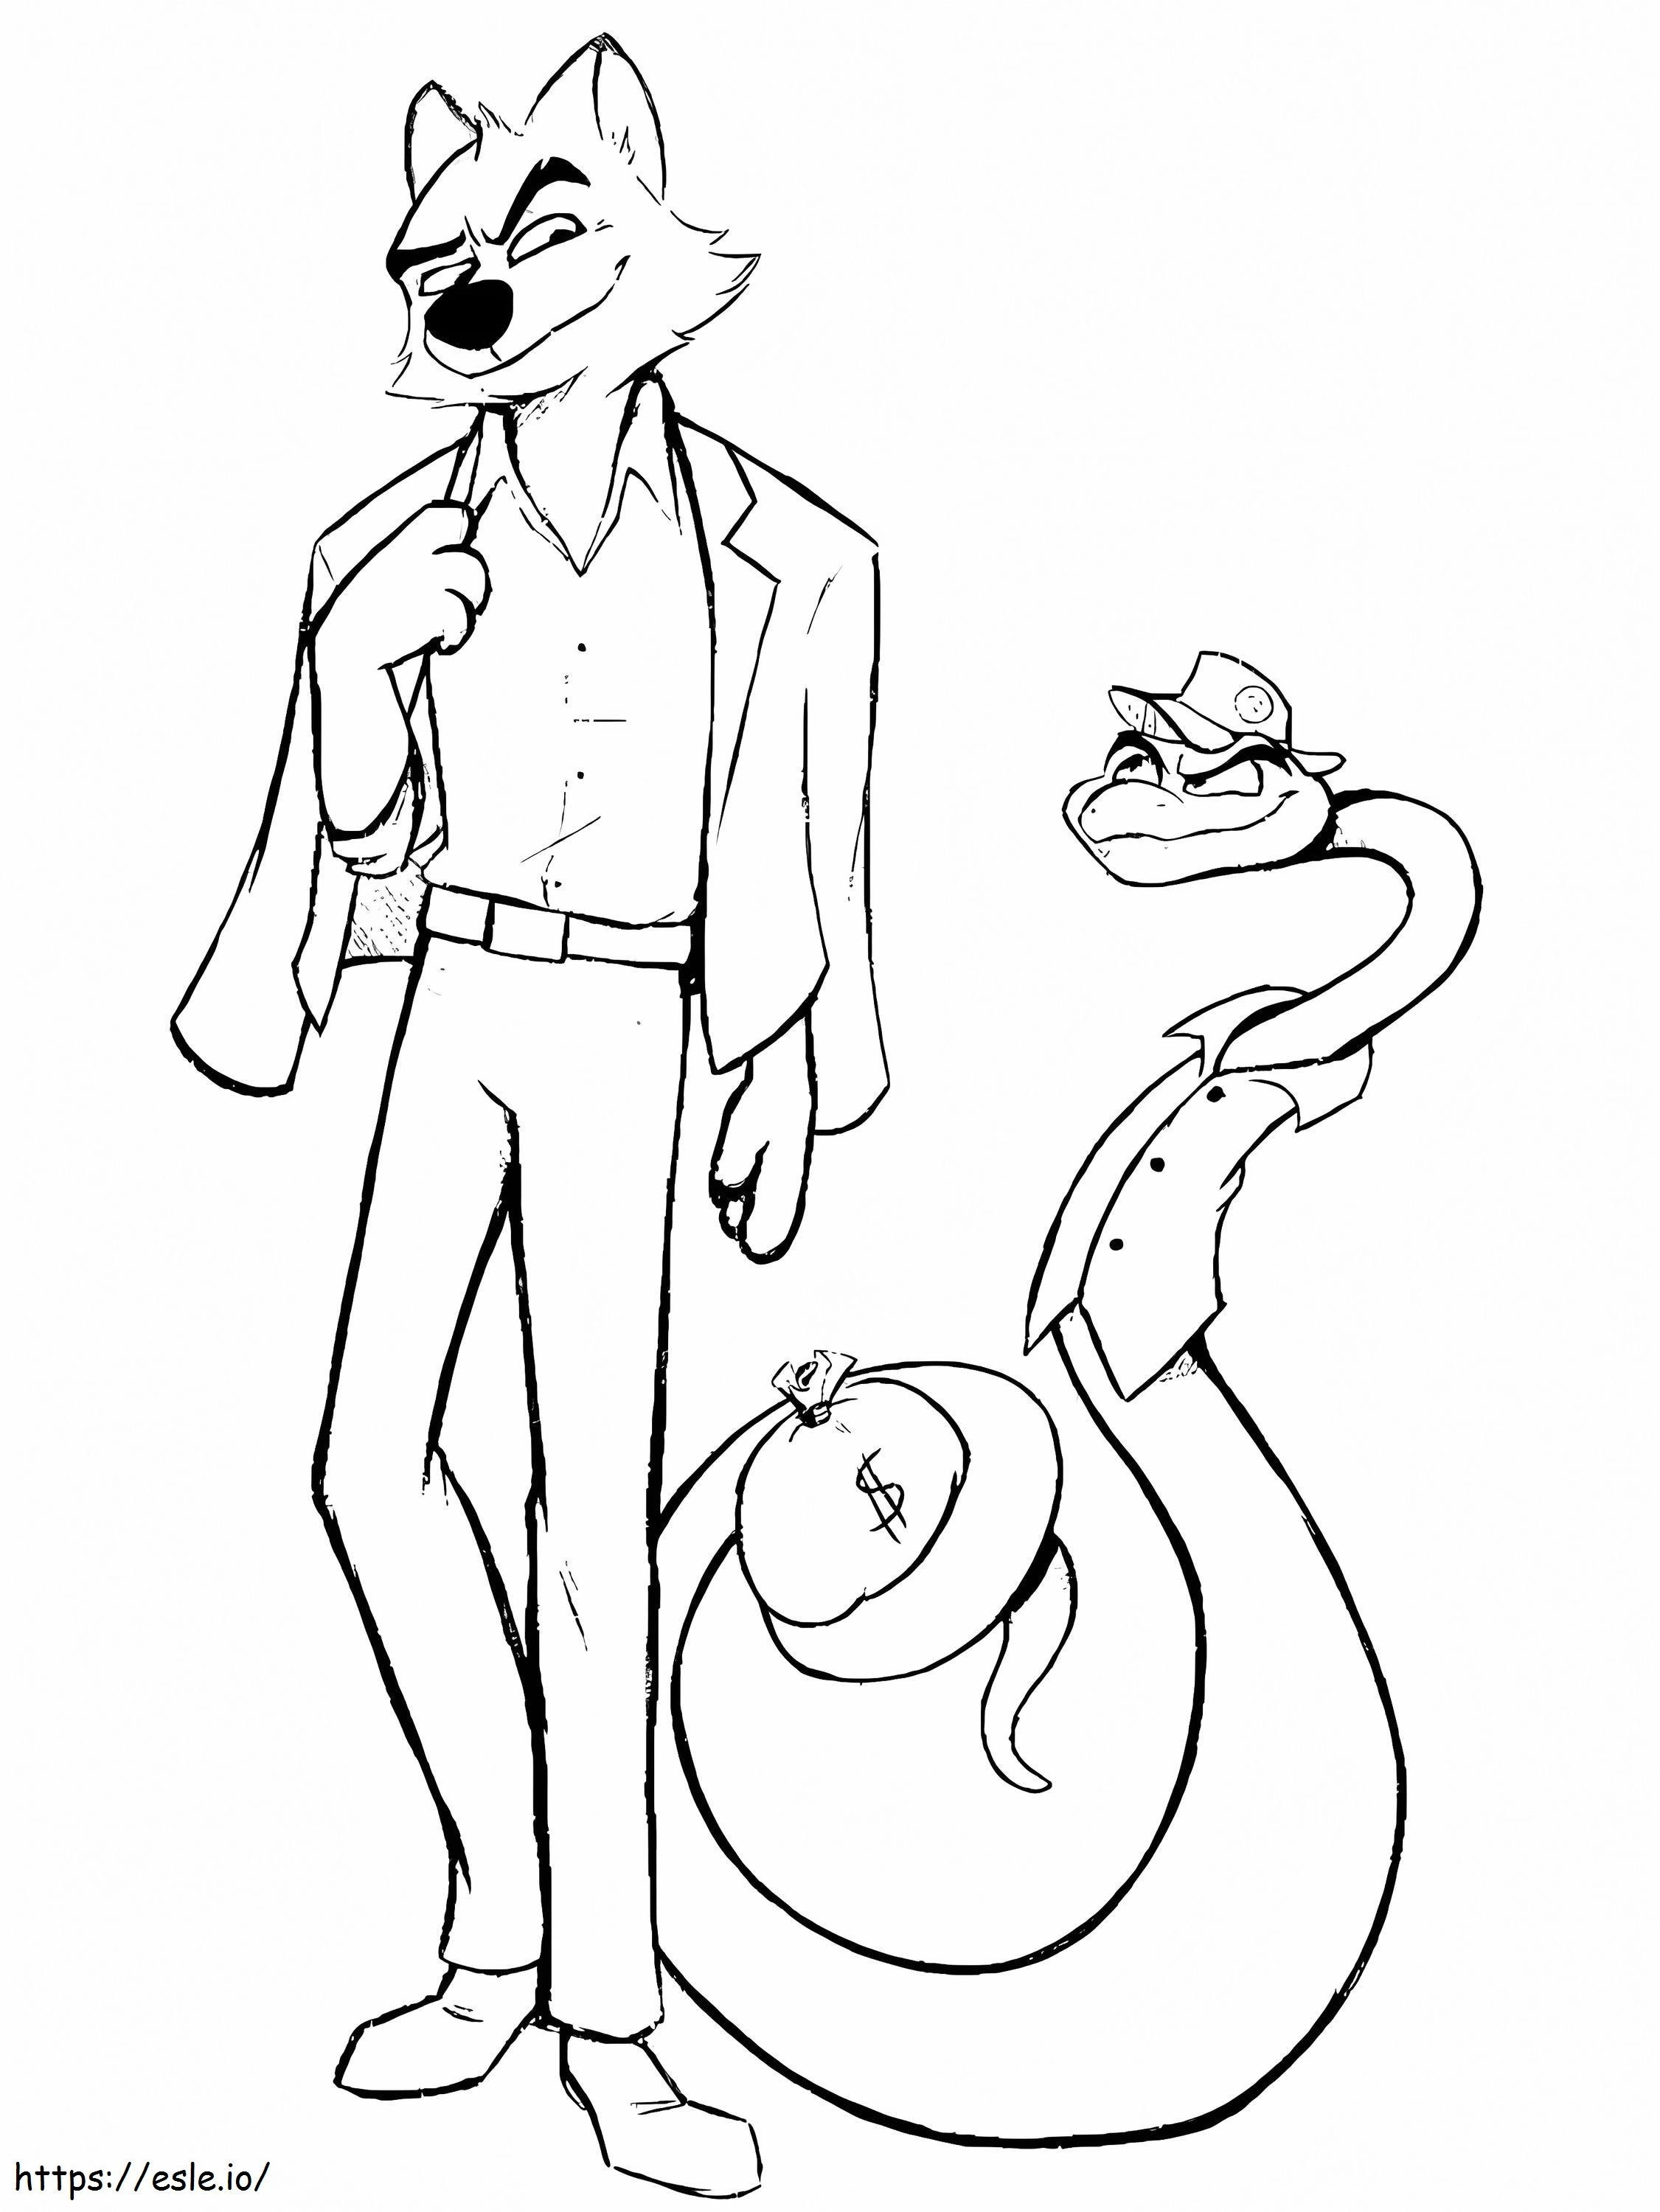 Mr. Wolf And Mr. Snake coloring page